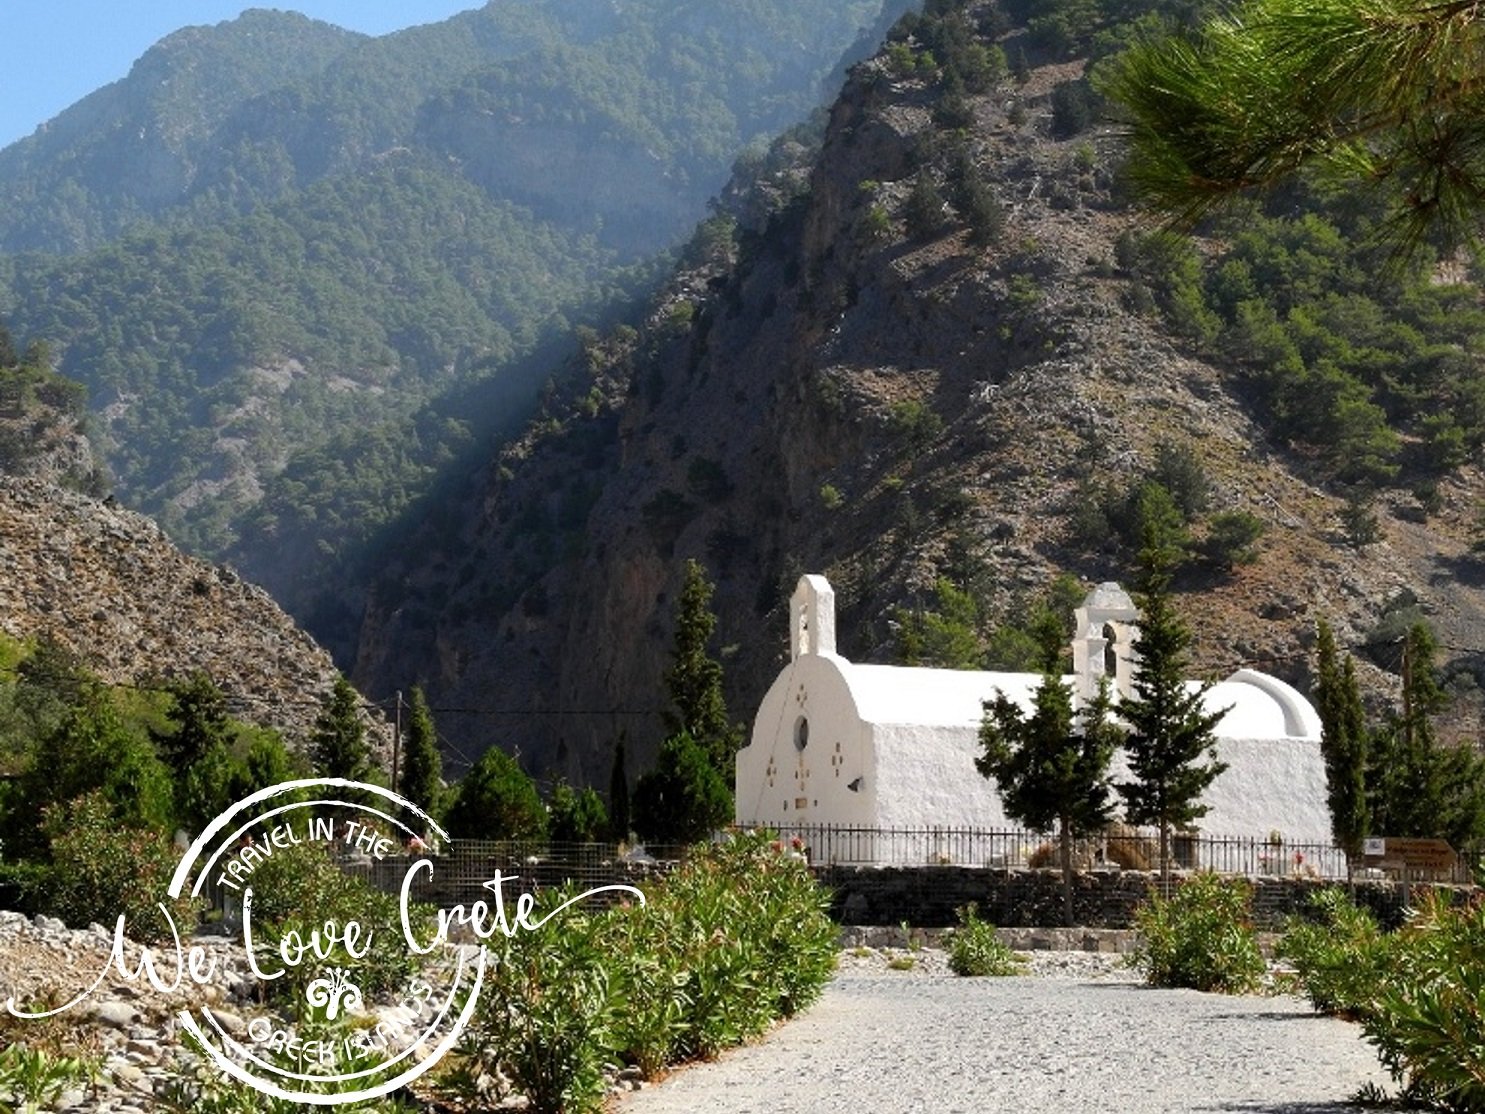 Samaria Gorge in south-west Crete is 16 km long